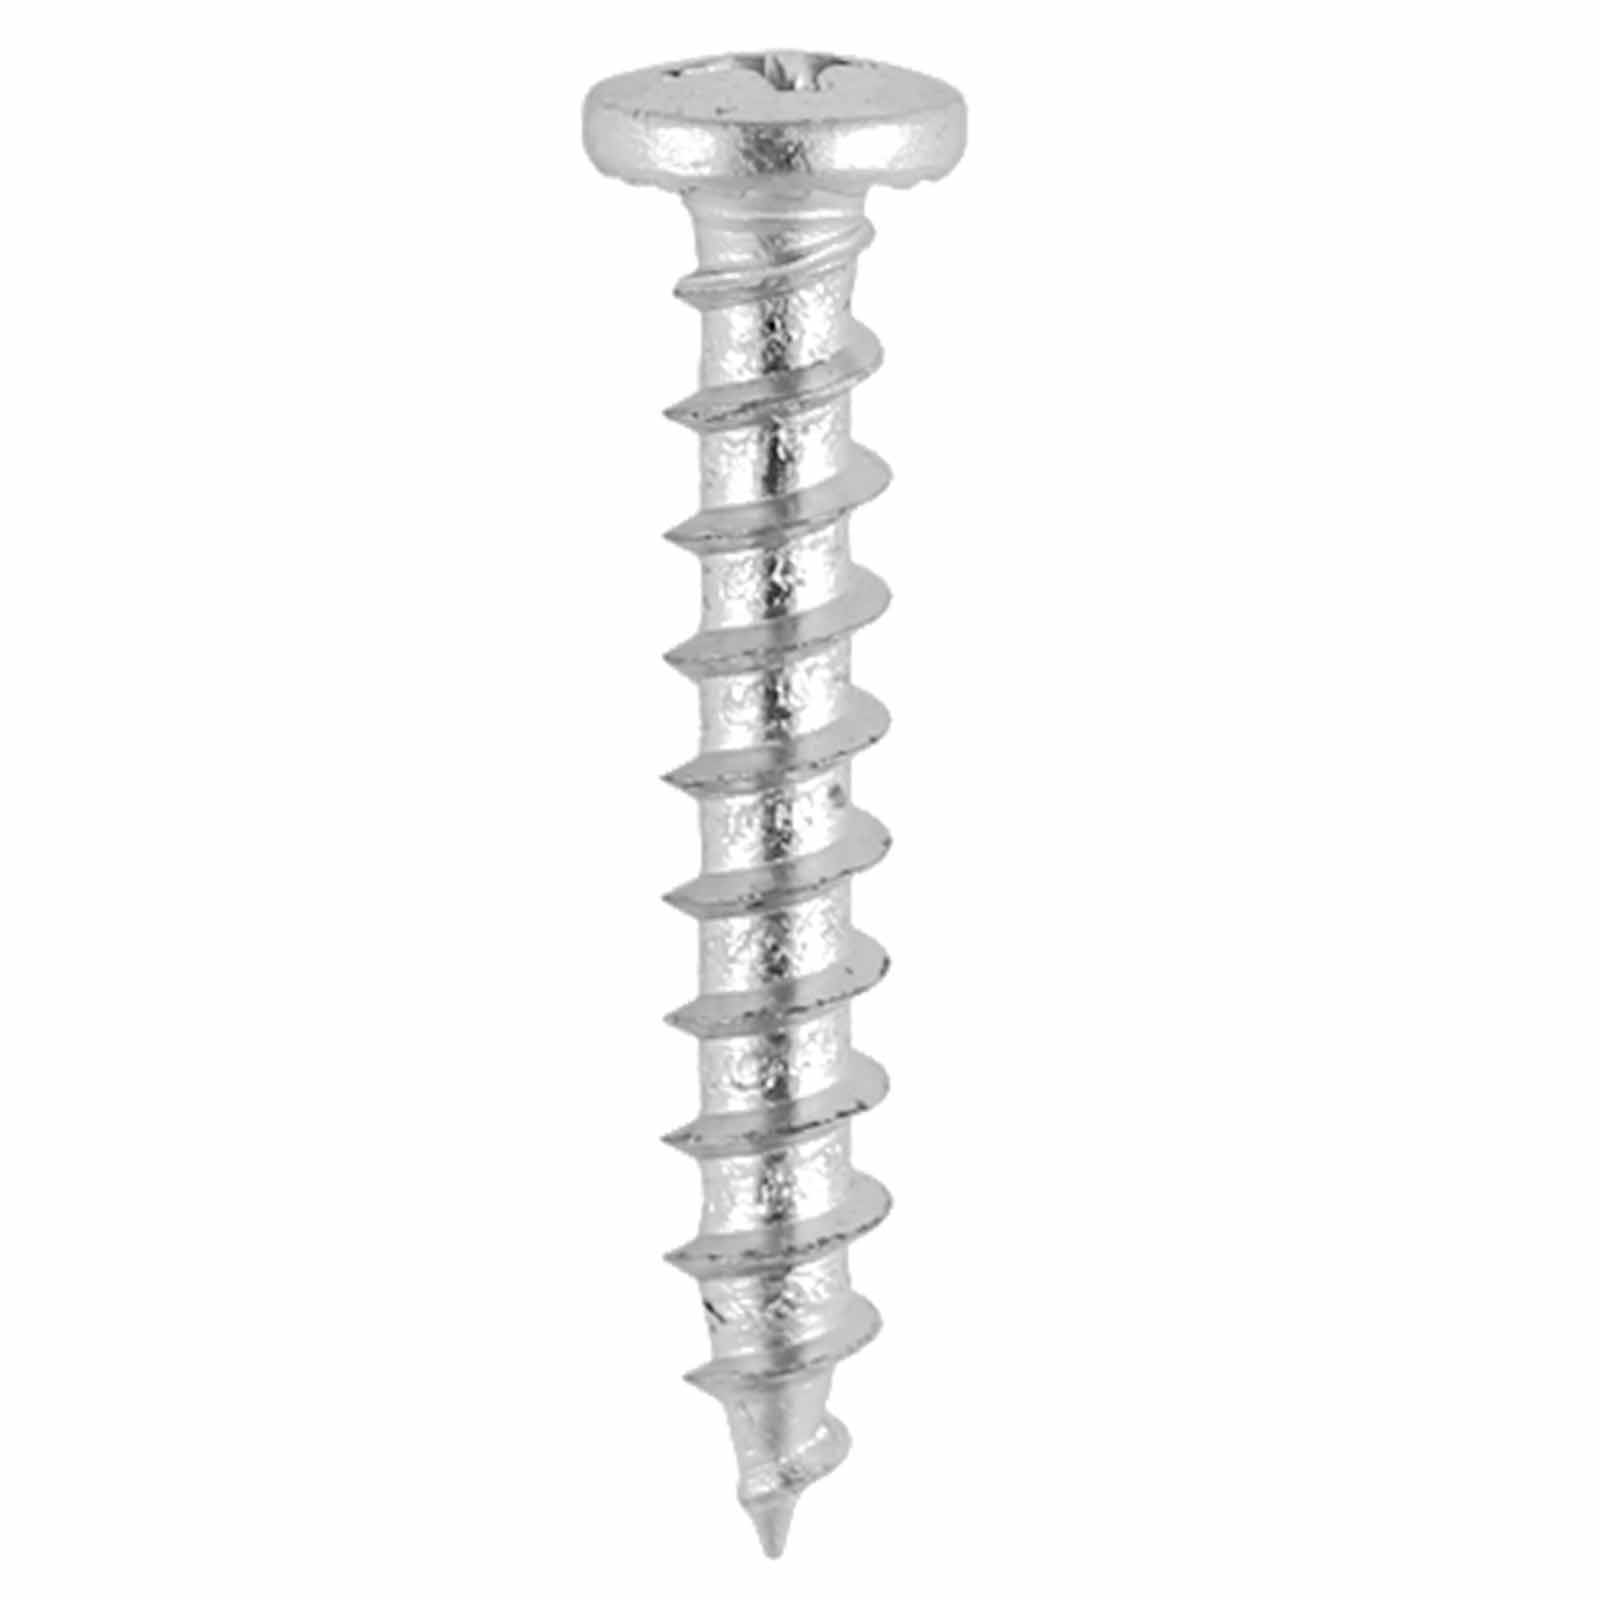 Photos - Nail / Screw / Fastener TIMCO Pvc Window Screws Shallow Pan Stainless 4.8mm 30mm Pack of 1000 218SS 